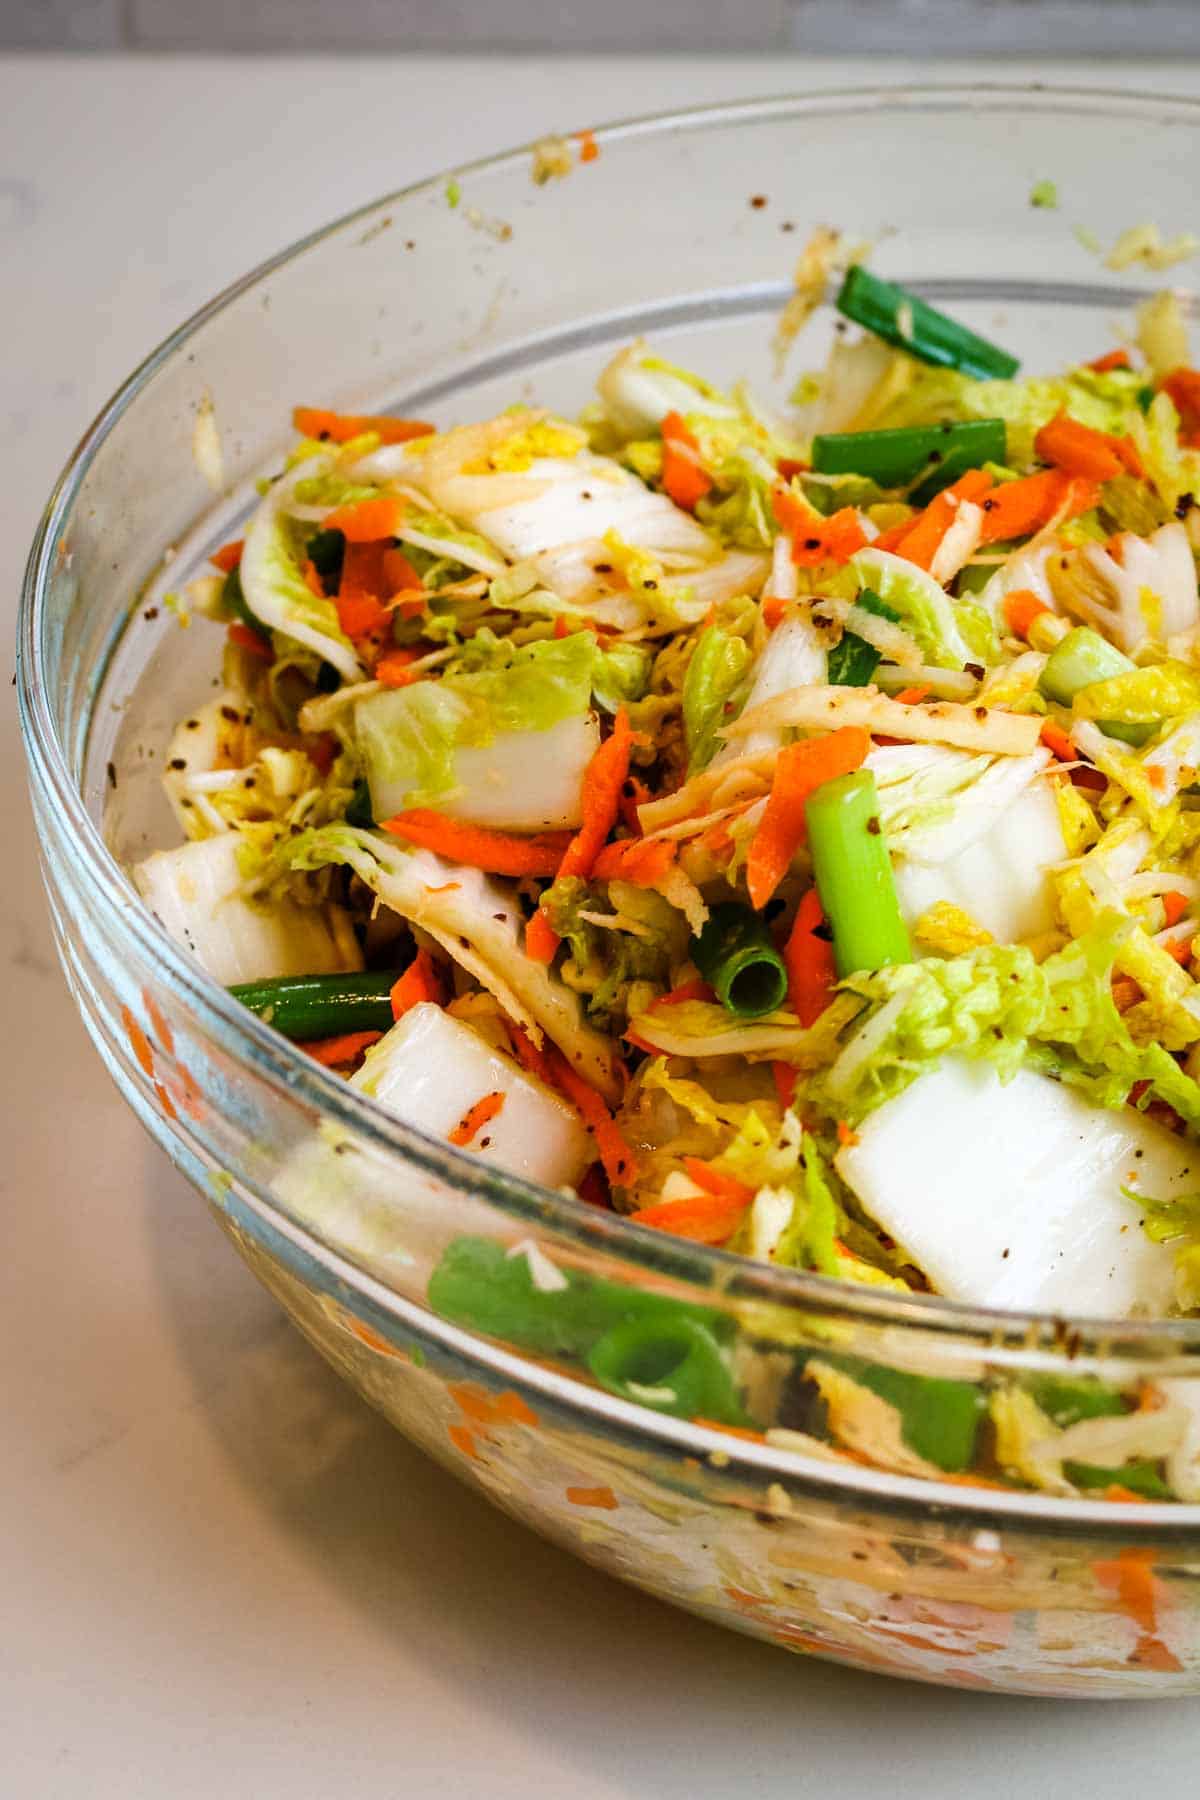 Combine all vegetables in large bowl in how to make kimchi.